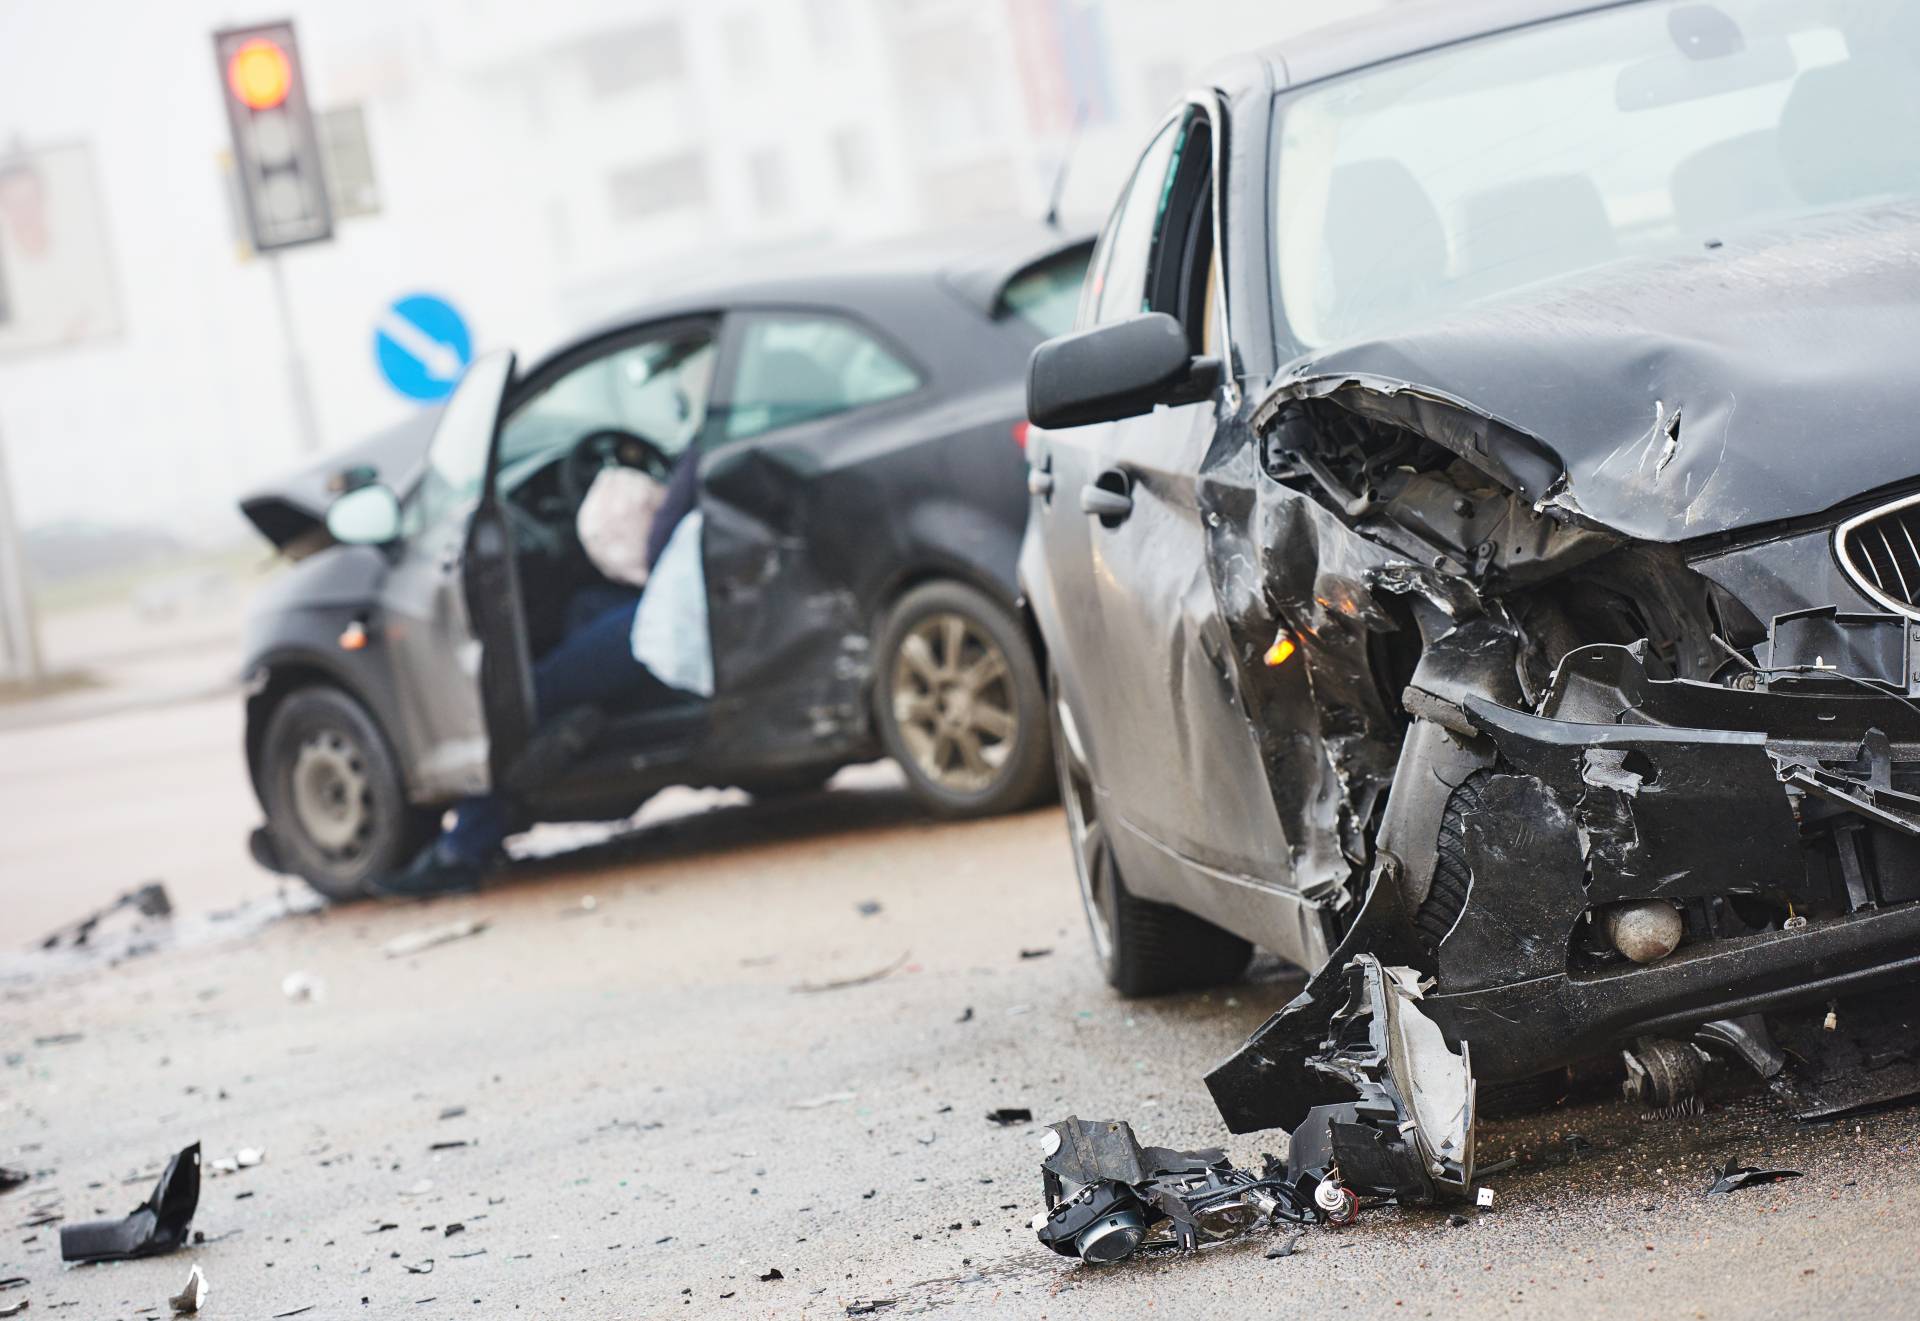 We want to get your car repaired as soon as possible. If you need help negotiating property damage with your insurance company, please let us know